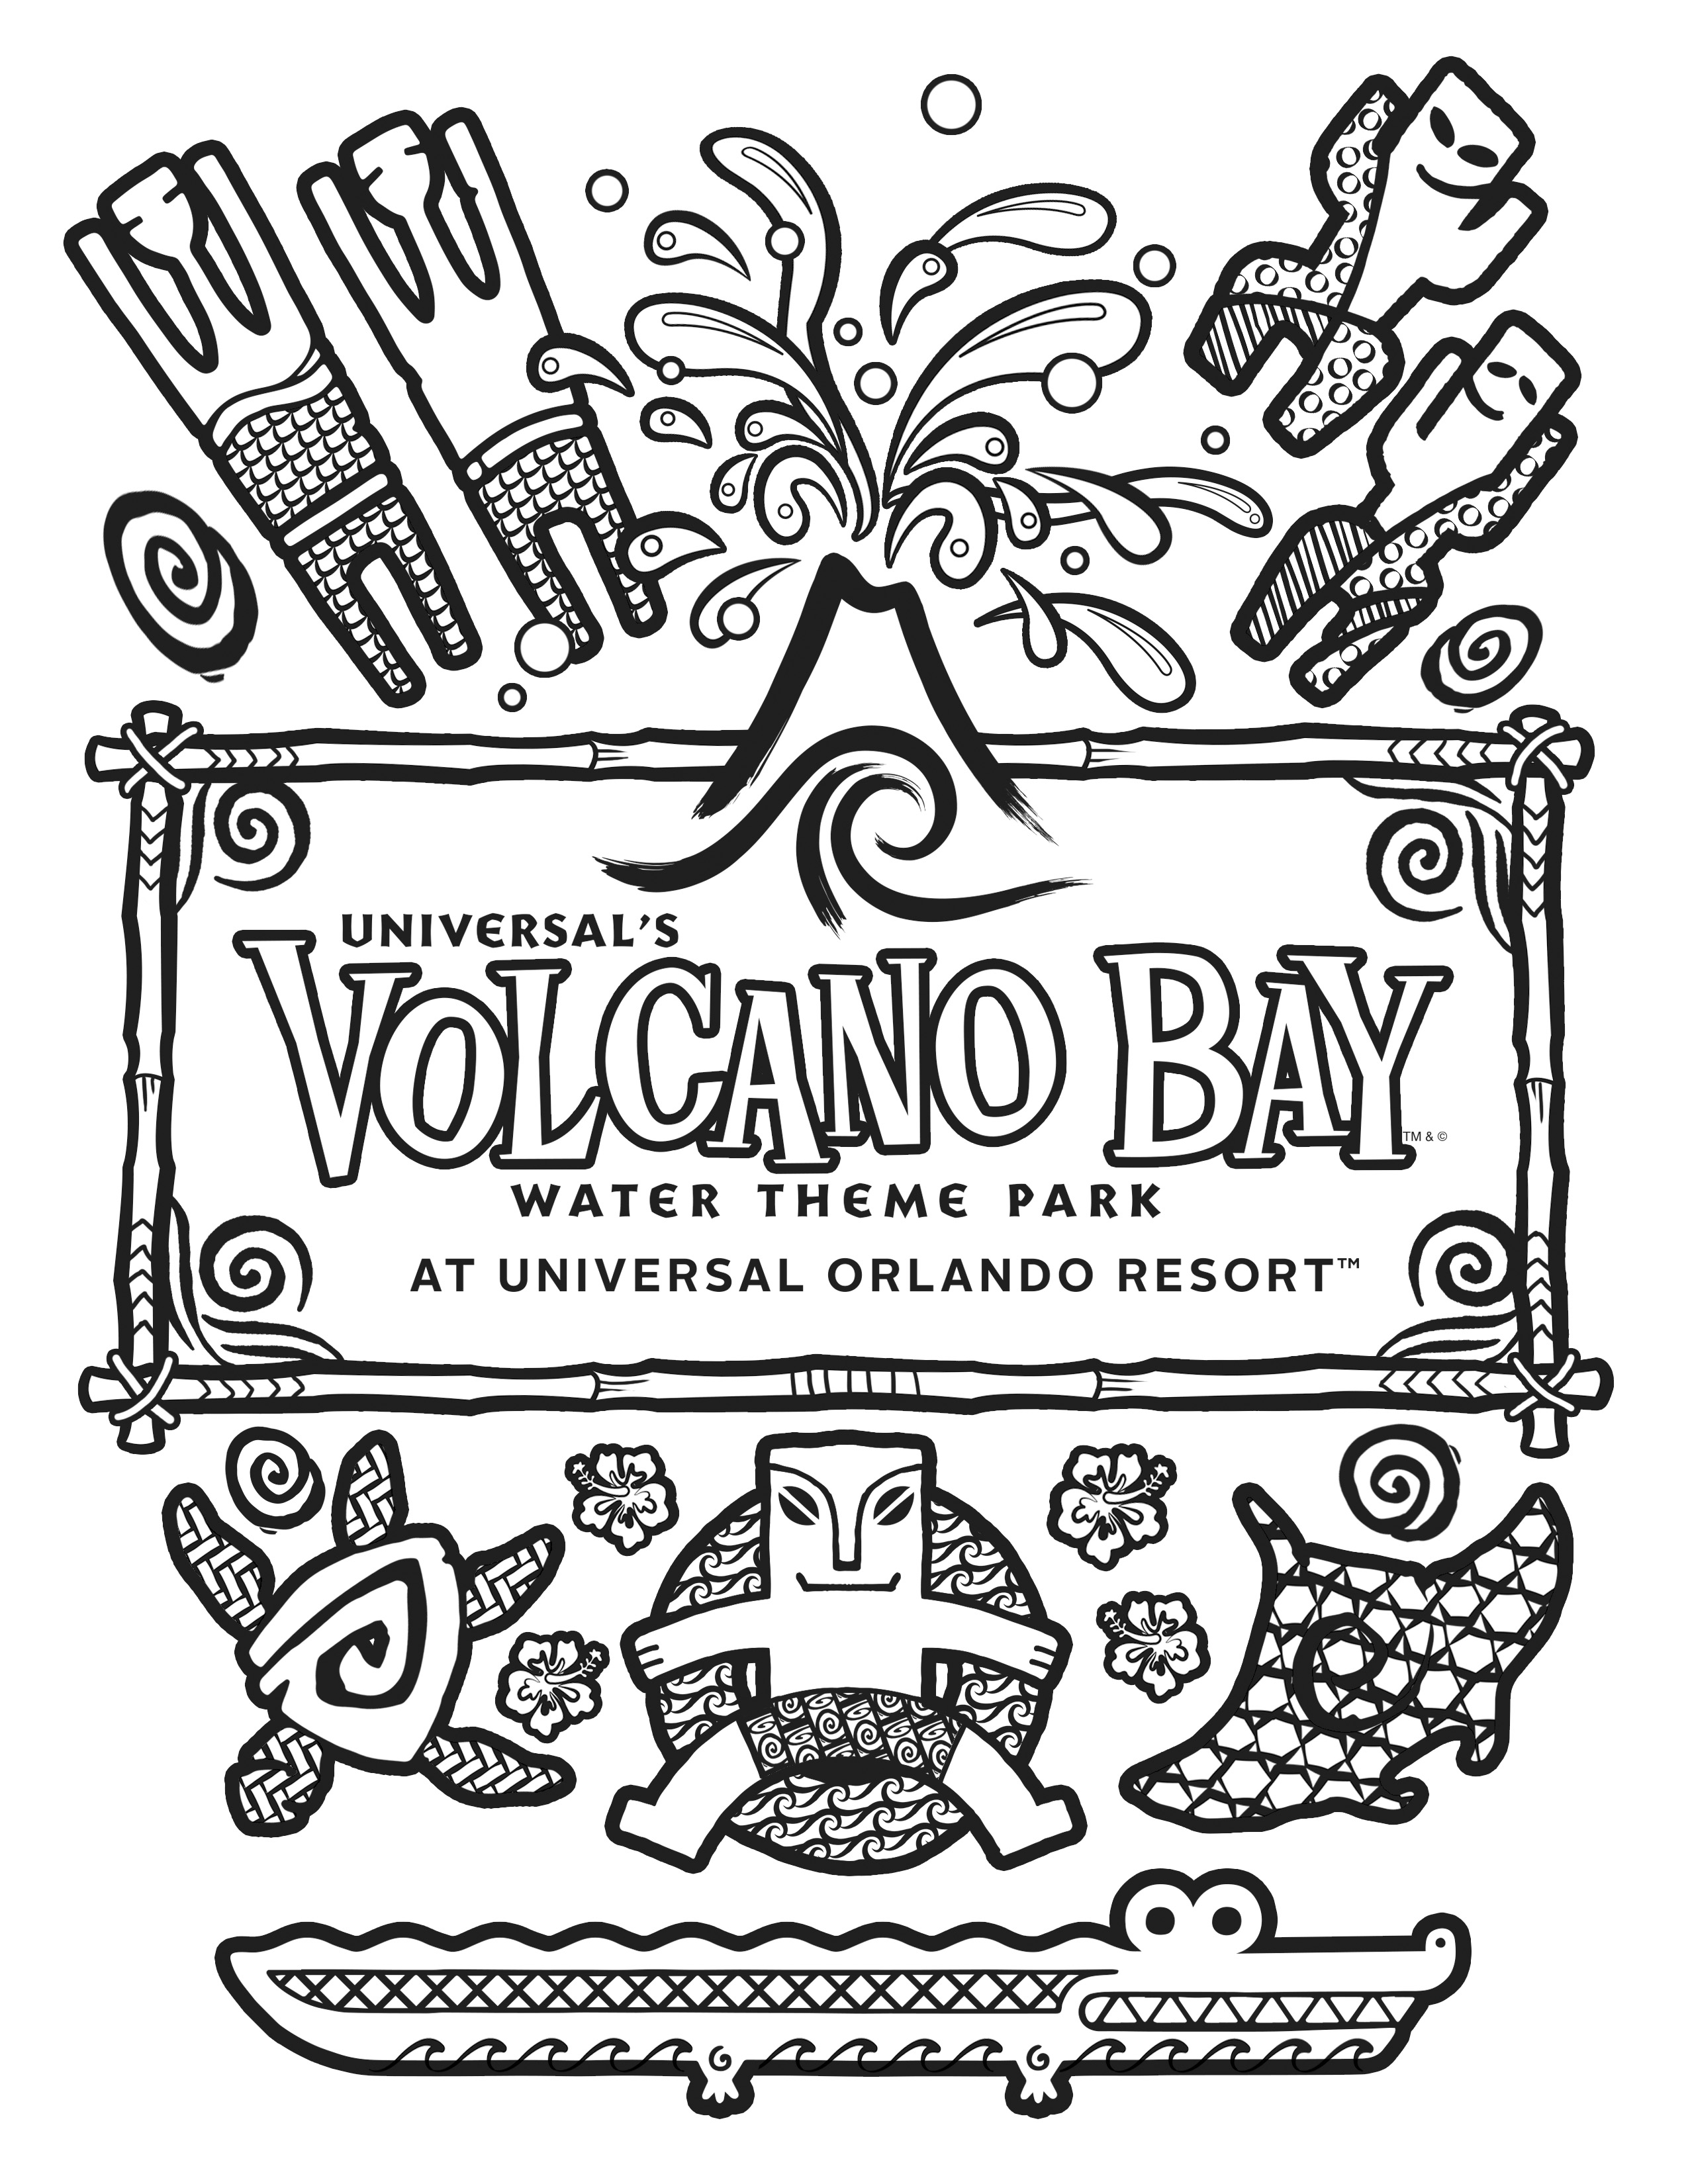 Universal's Volcano Bay Coloring Page